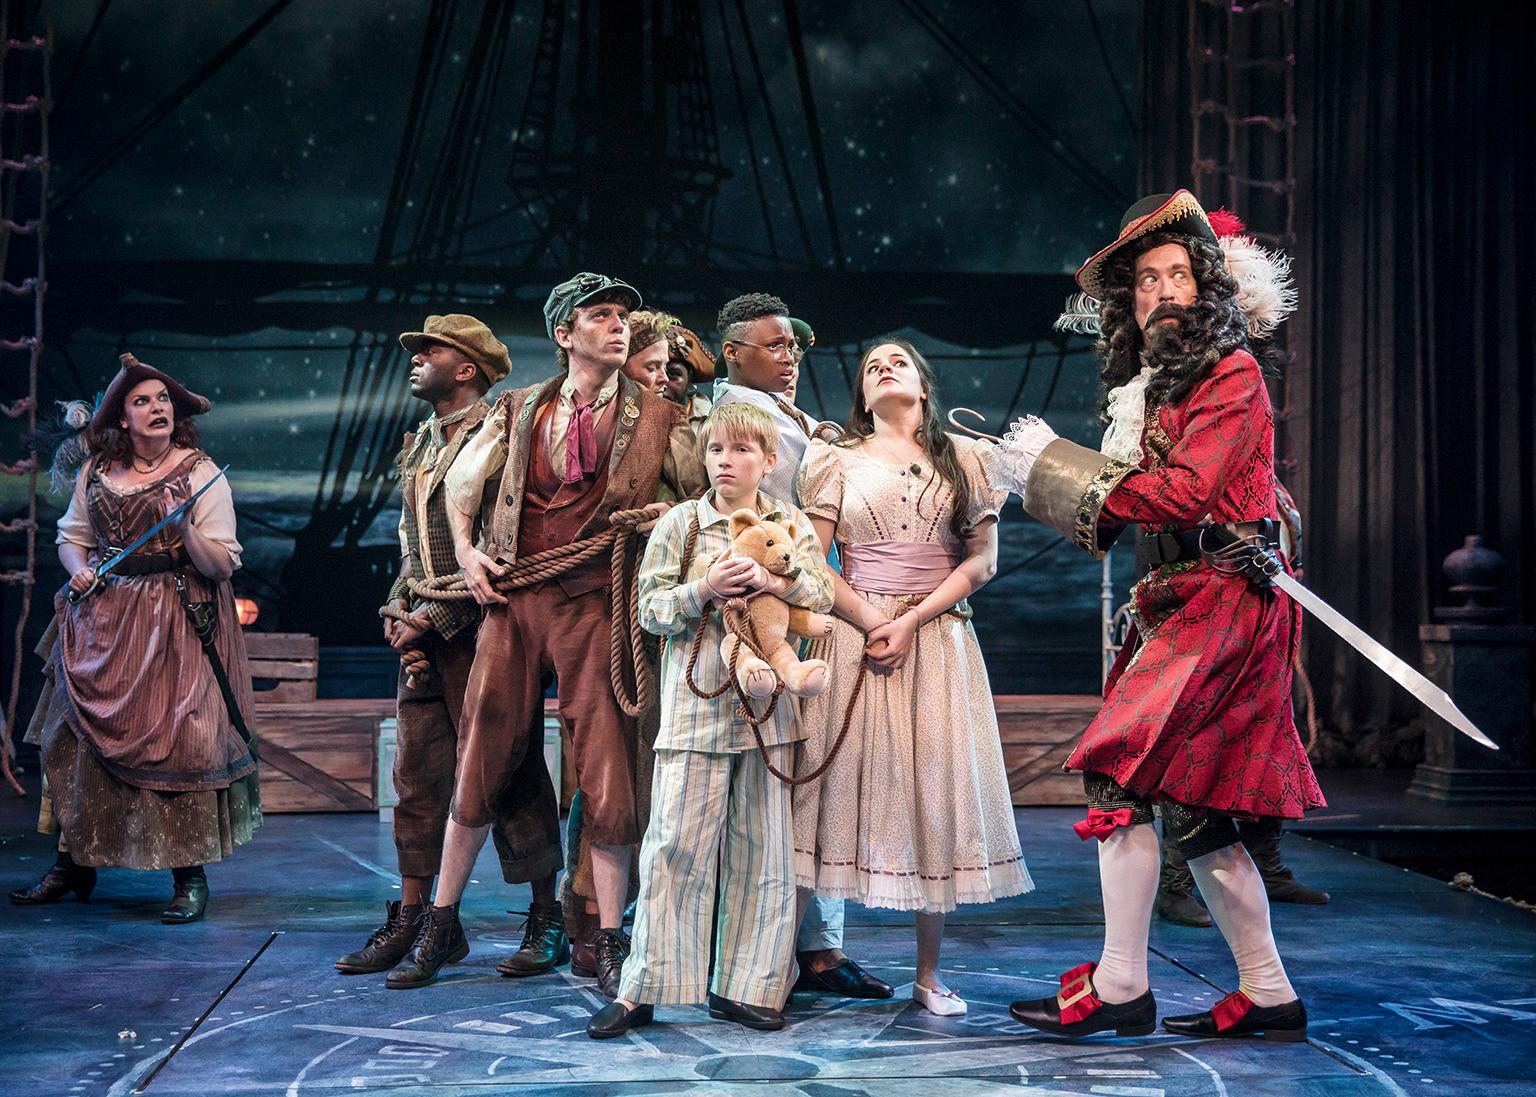 Captain Hook (James Konicek) taunts the captured Lost Boys and Darling siblings, with the help of Starkey (Christina Hall) in “Peter Pan – A Musical Adventure.” (Photo by Liz Lauren)